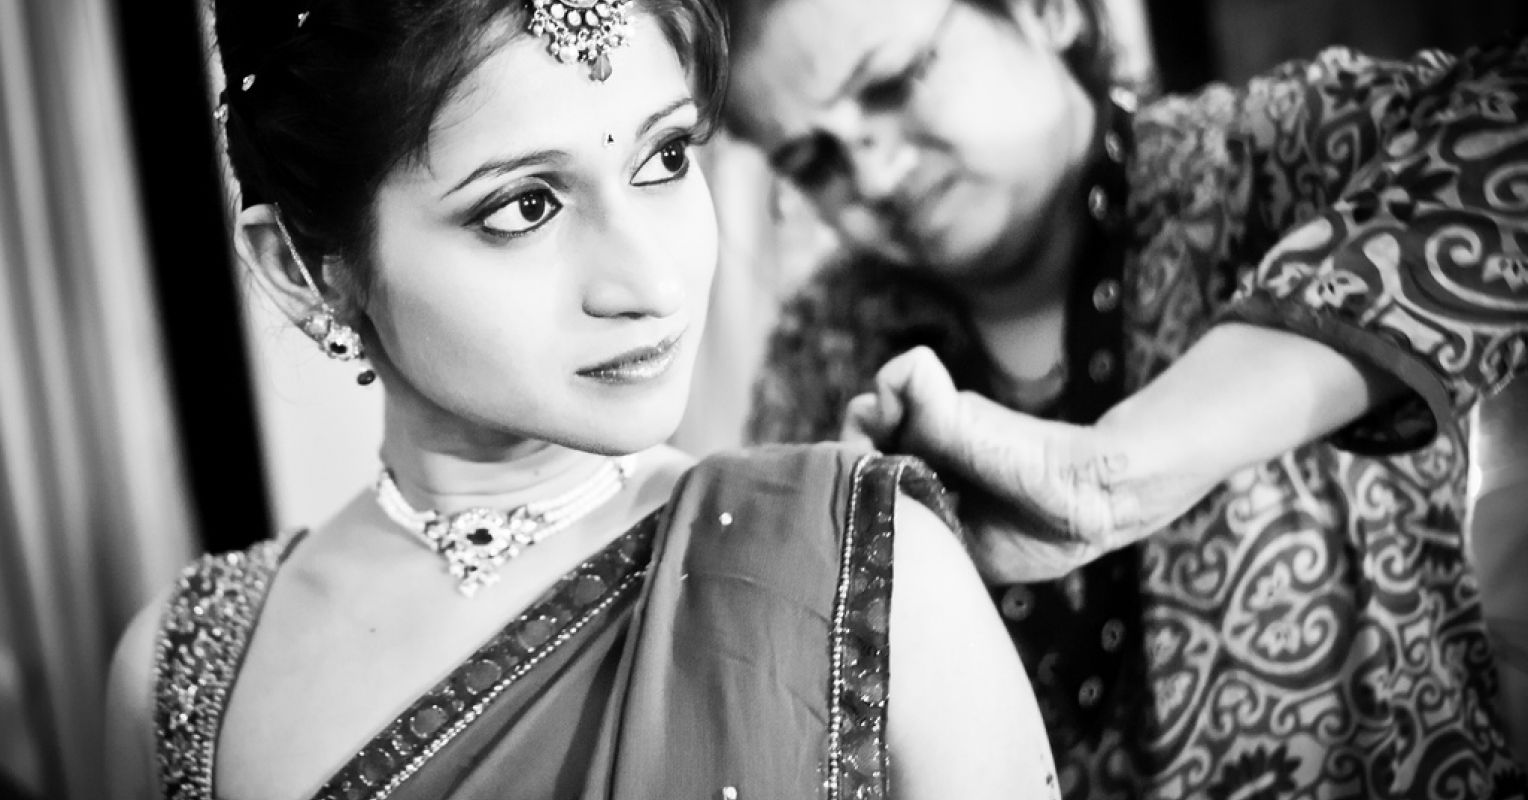 Why Are So Many Indian Arranged Marriages Successful? | Psychology Today